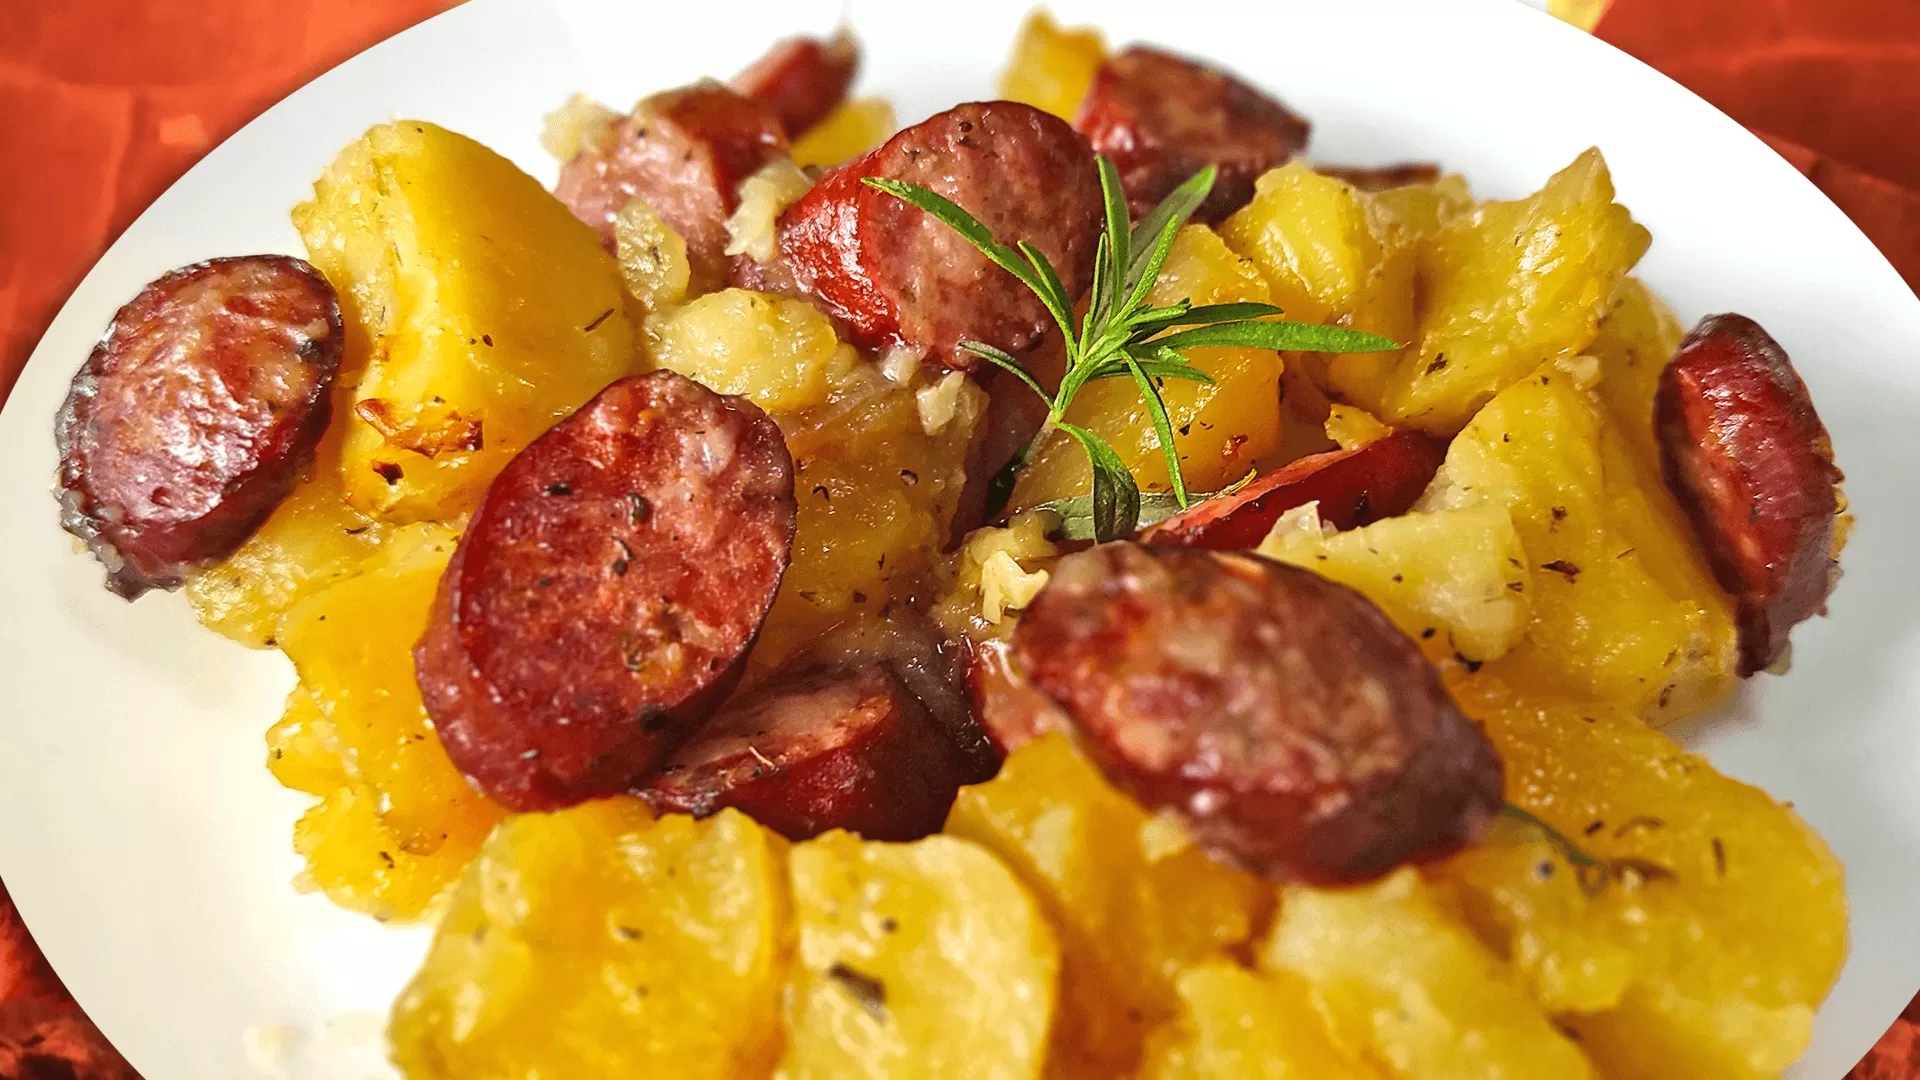 Smoked Sausage and Potatoes in the Oven